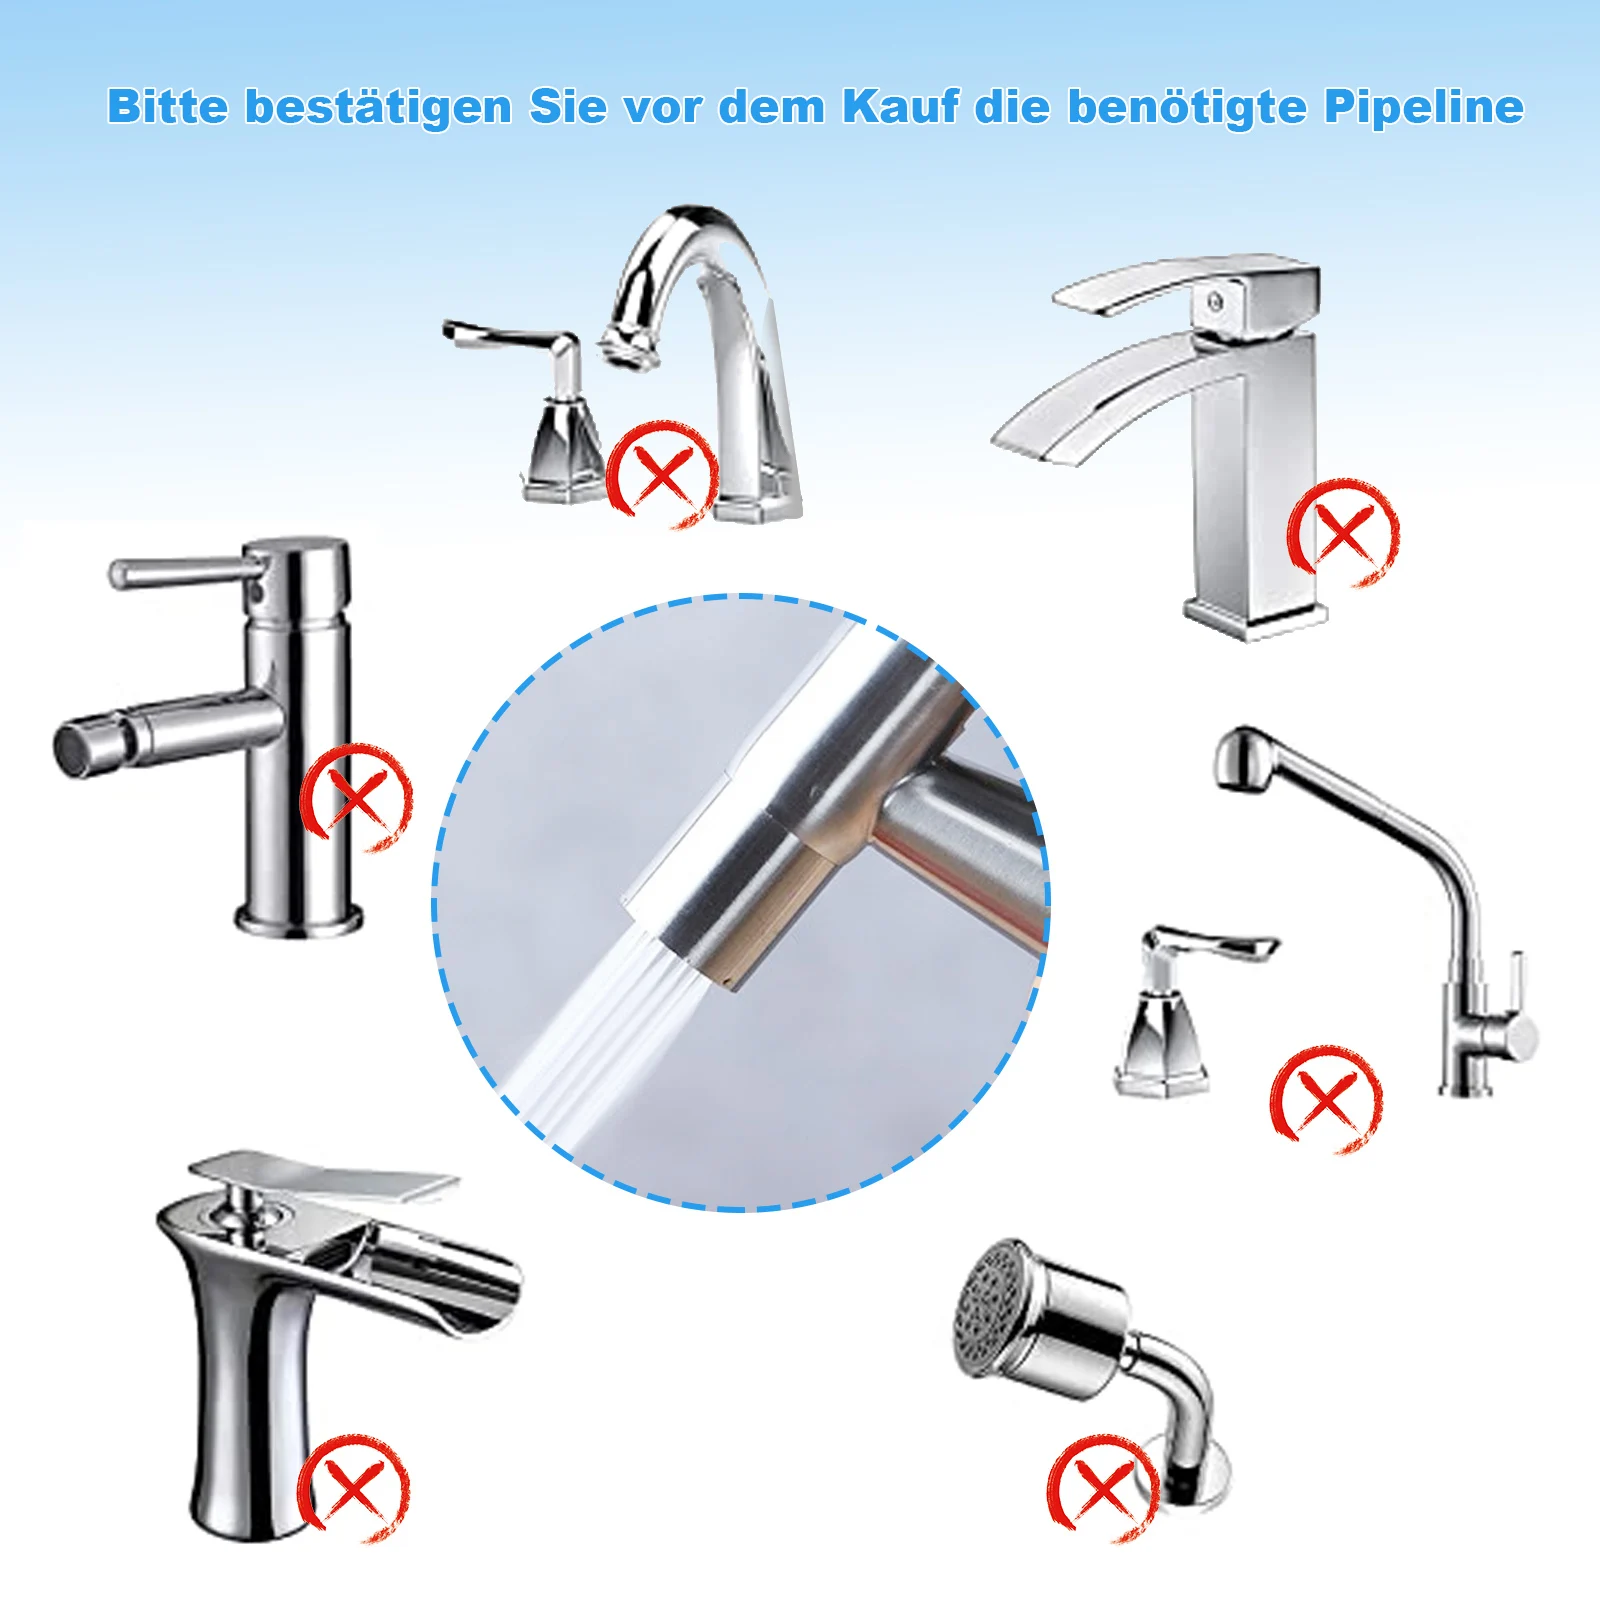 

2Pcs Women Bidet Faucets Stainless Steel Wear-resistant Washing Device Leakproof Manual Adults Cleaning Tools Bathroom